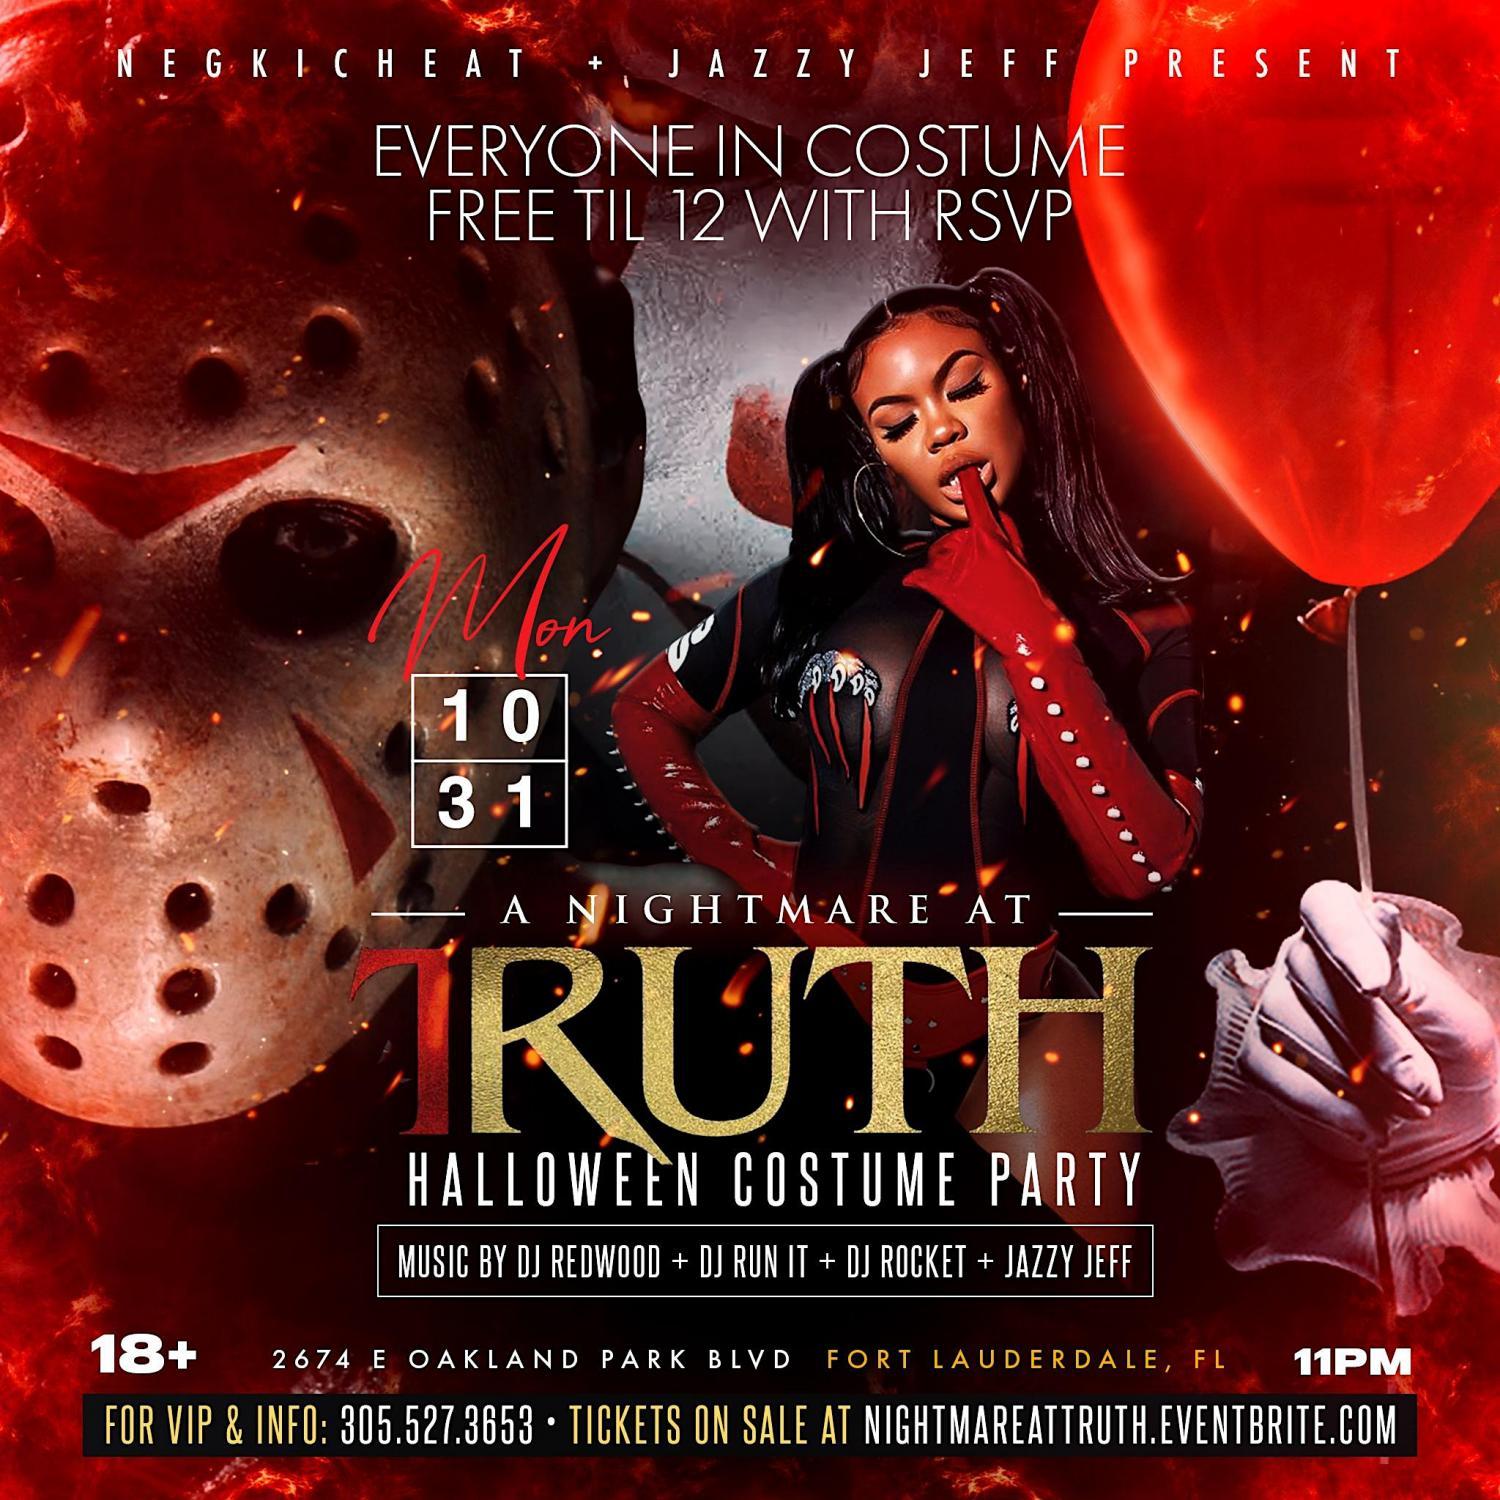 A NIGHTMARE AT TRUTH: HALLOWEEN COSTUME PARTY
Mon Oct 31, 11:00 PM - Tue Nov 1, 4:00 AM
in 12 days